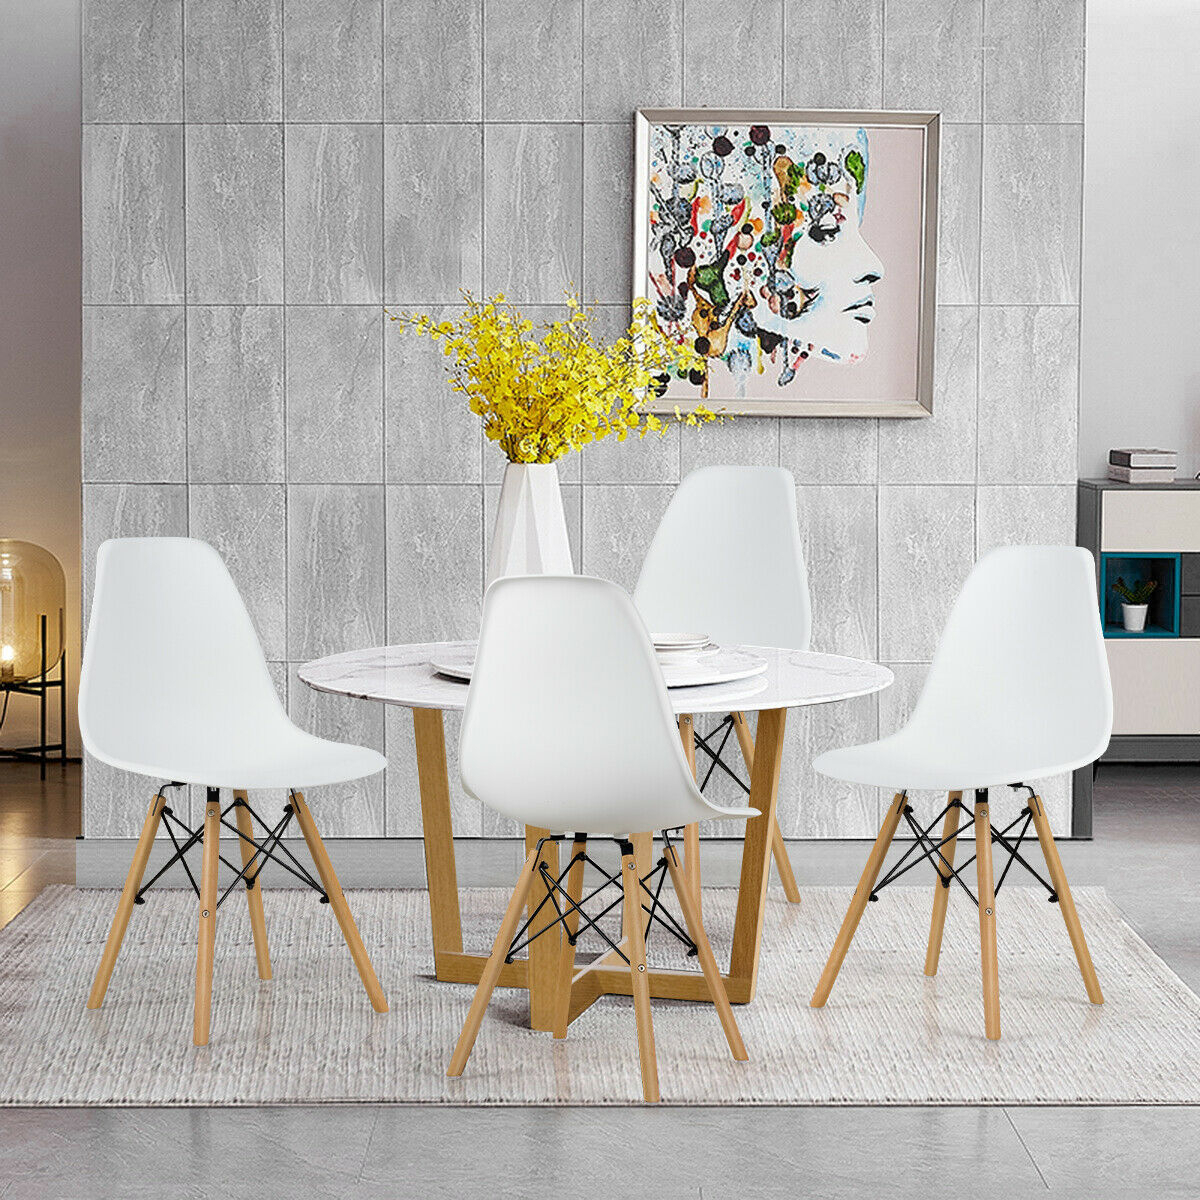 Set Of 4 Modern Dining Side Chair Armless Home Office W/ Wood Legs White